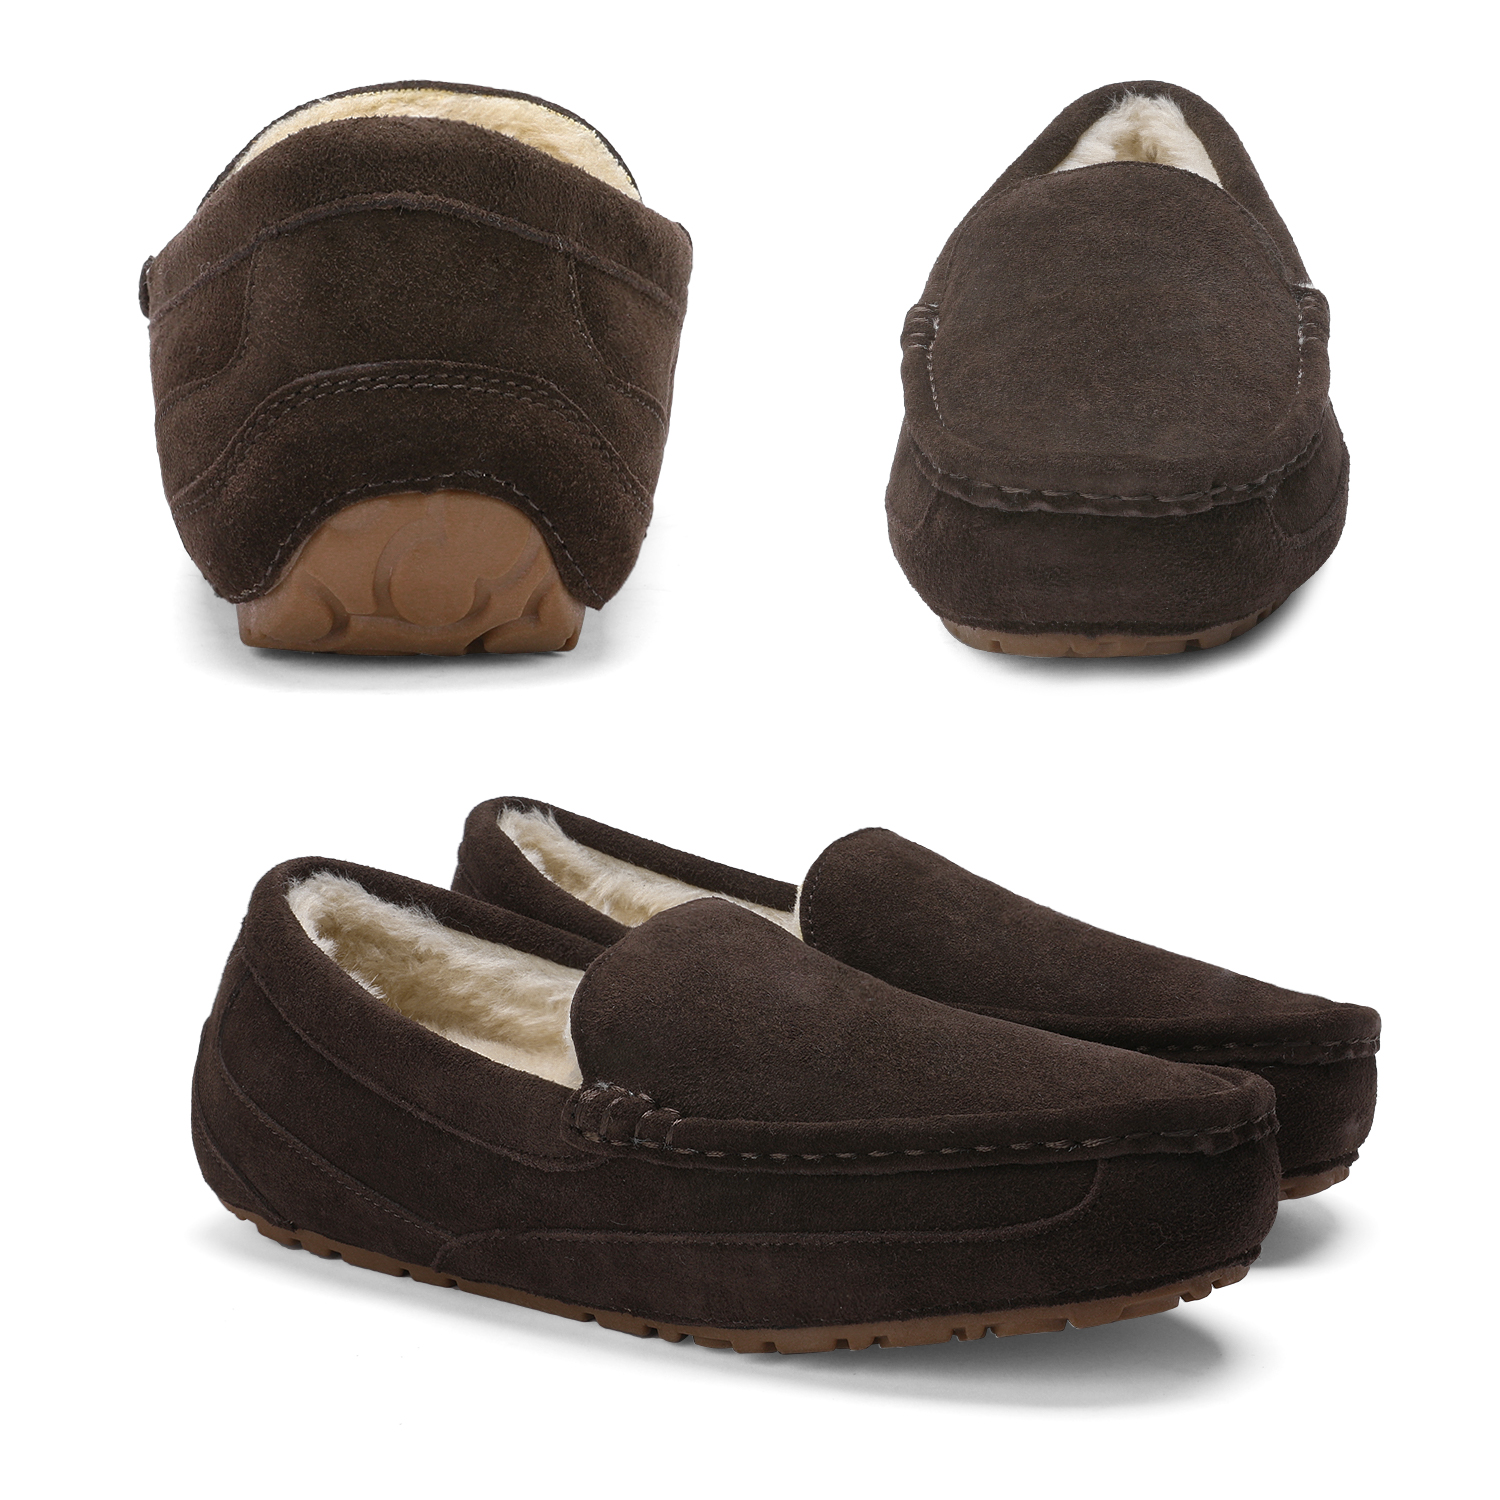 Dream Pairs New Soft Mens Au-Loafer Indoor Warm Moccasins Slippers Flats Shoes Au-Loafer-01 Brown Size 7 - image 4 of 4